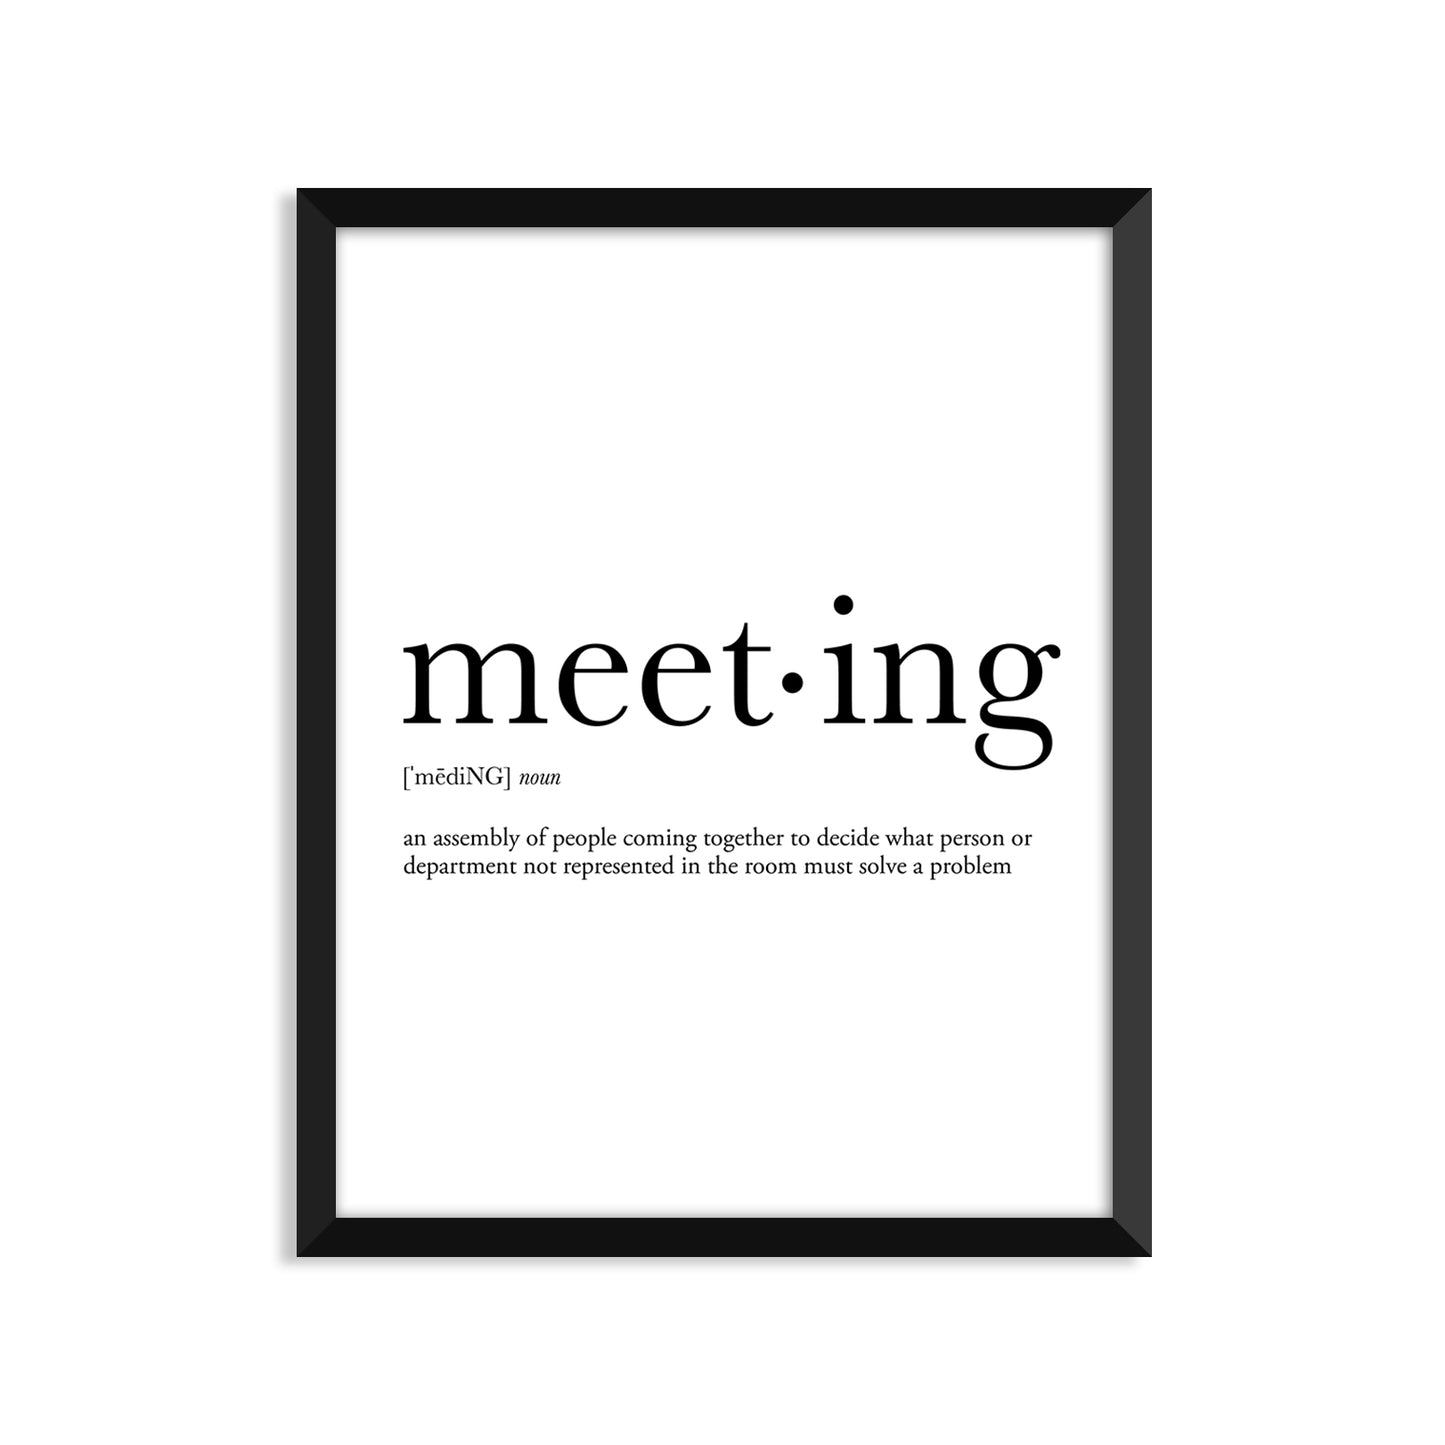 Meeting Definition - Unframed Art Print Or Greeting Card